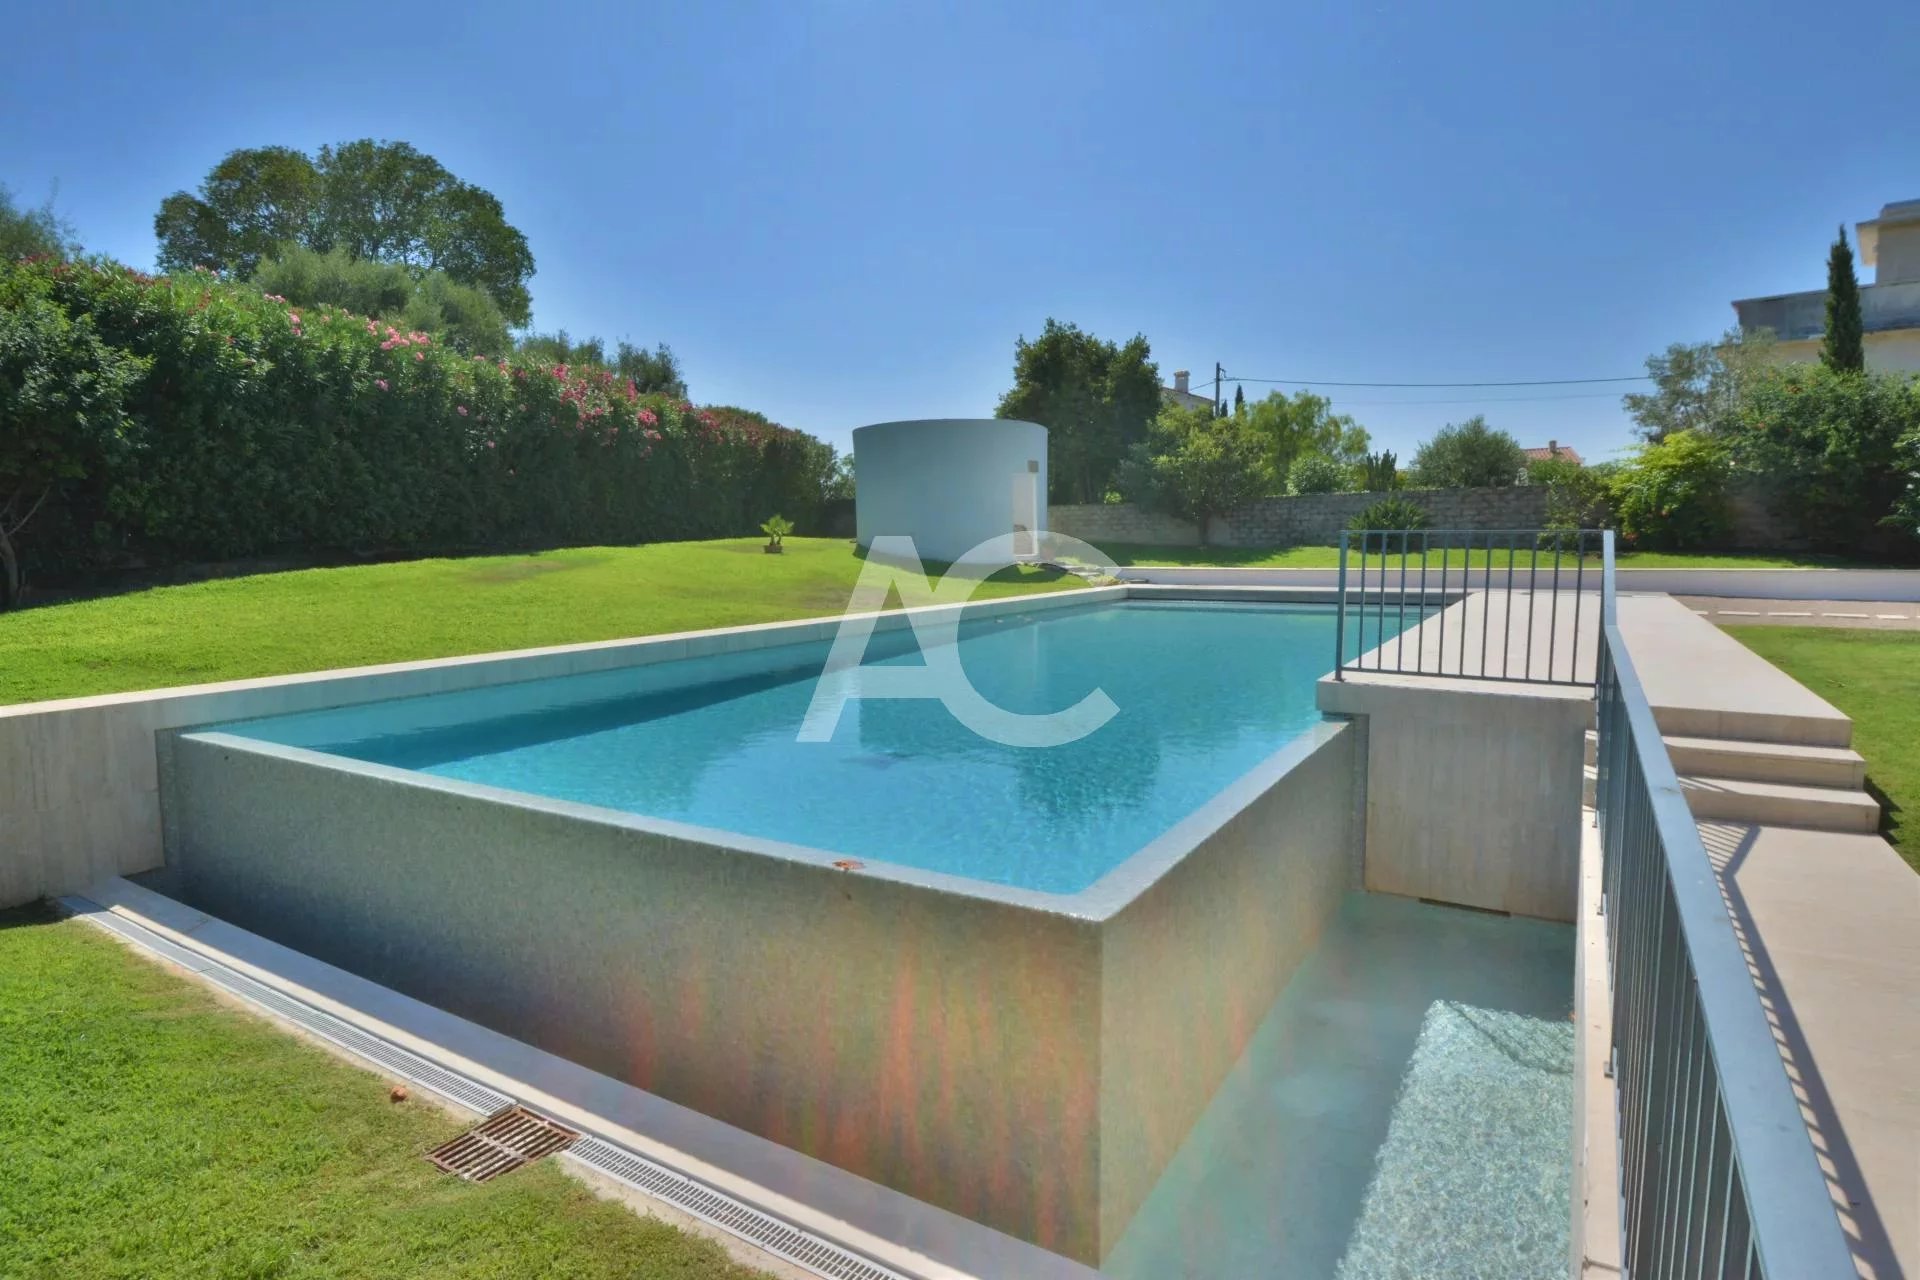 CAP D'ANTIBES - EXCEPTIONAL VILLA WITH 4100m² OF LAND PLOT